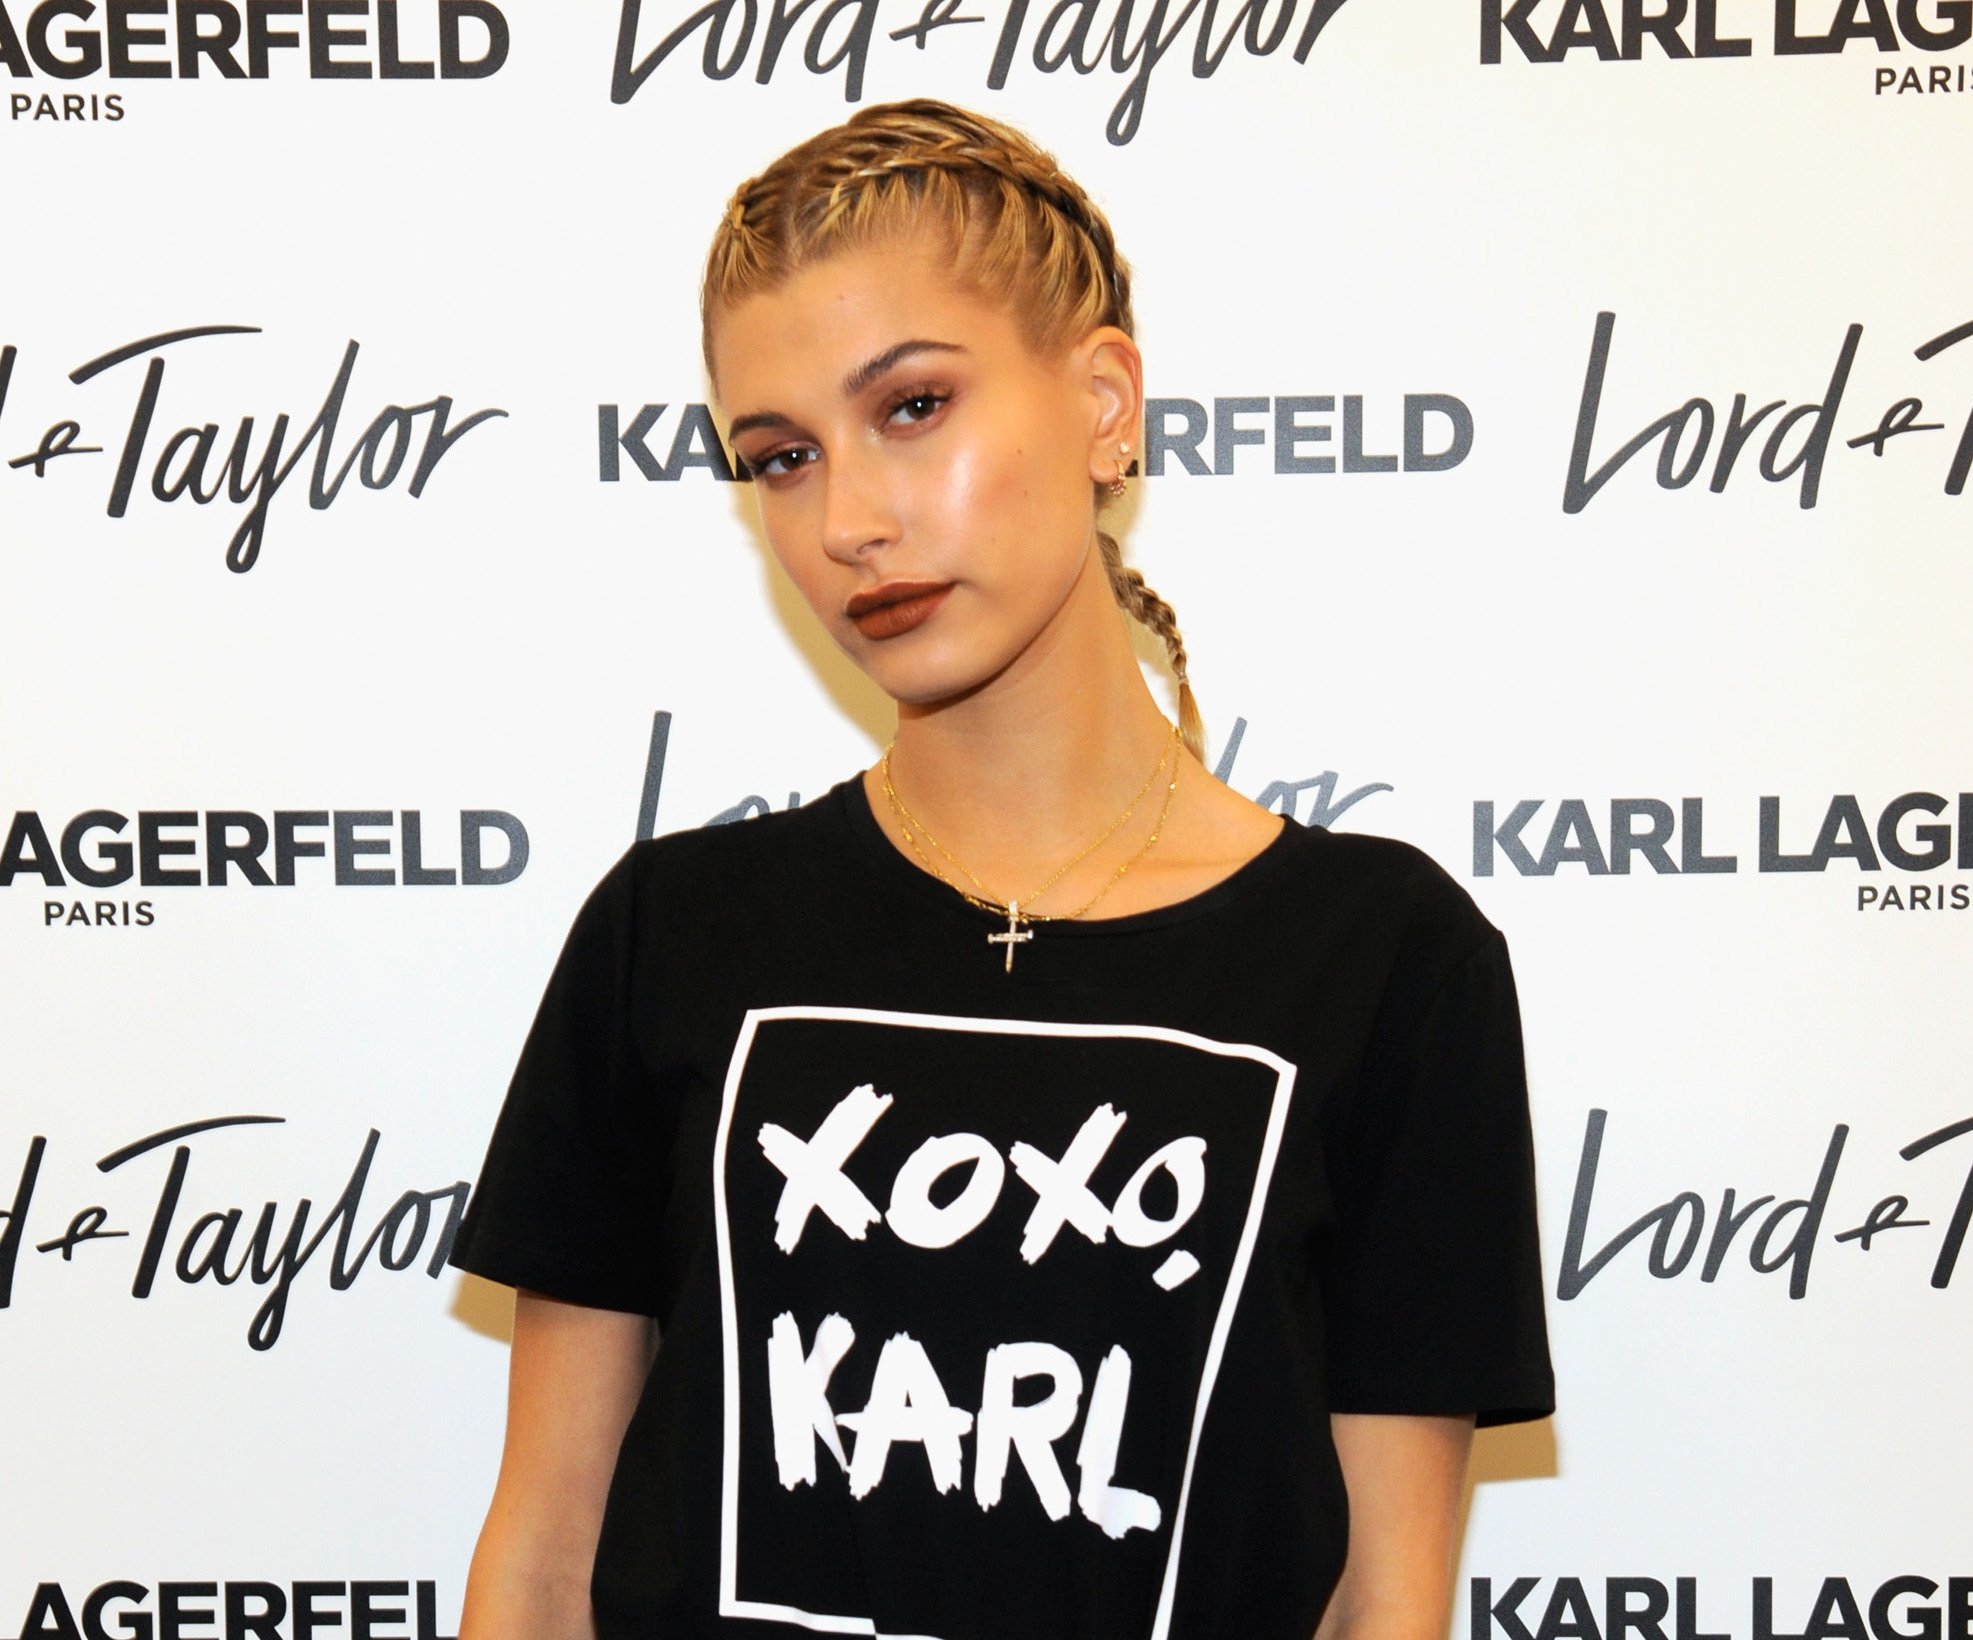 Hailey Baldwin Wore a Button Up Shirt and No Pants